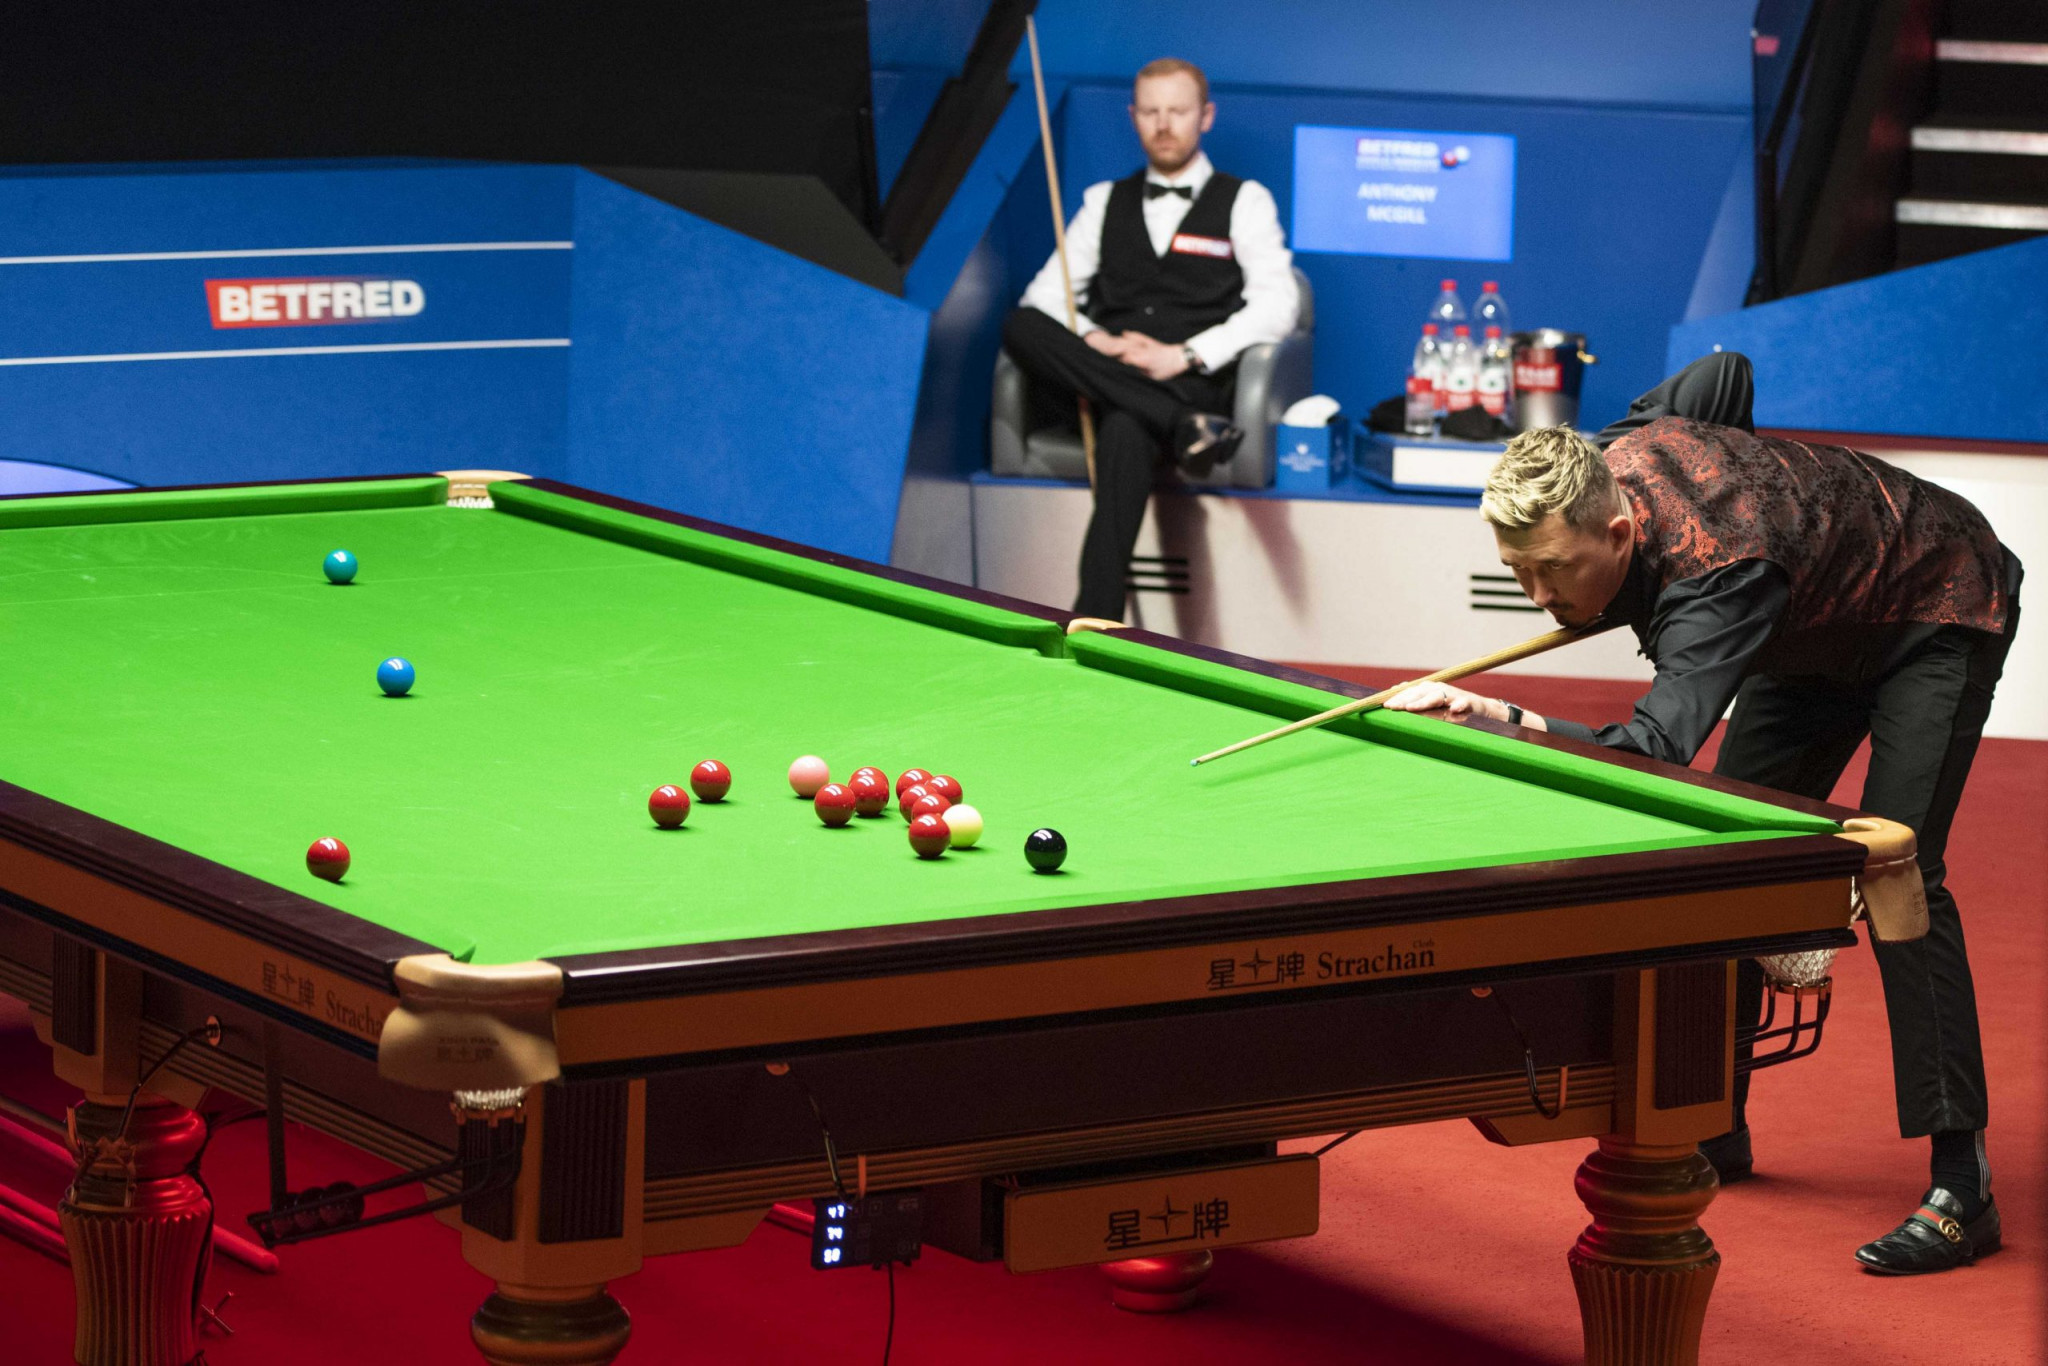 There will be an all-English final at the World Snooker Championship in Sheffield after Kyren Wilson defeated Scotland's Anthony McGill in the semi-final ©World Snooker 